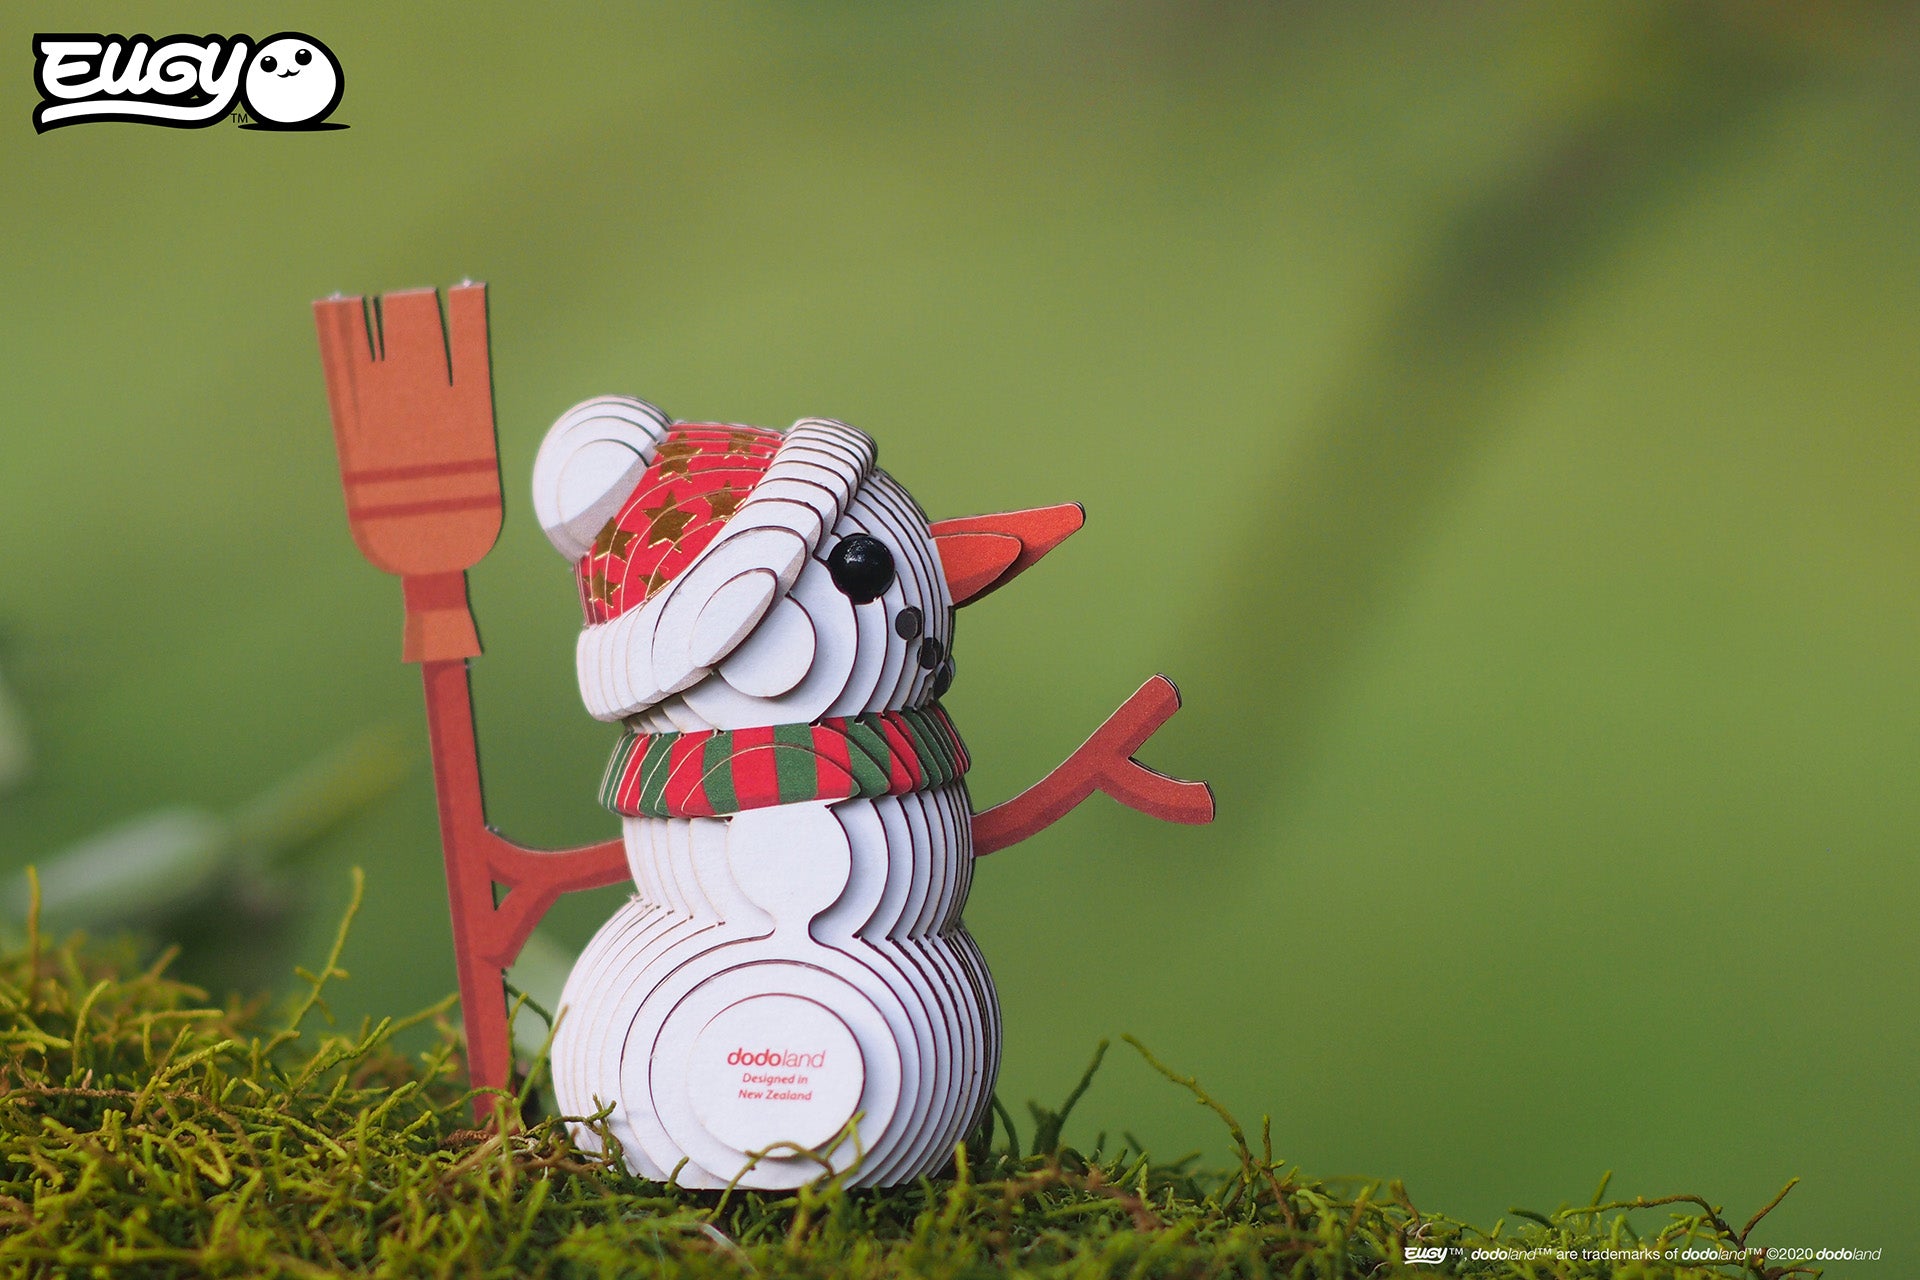 Image of an EUGY Snowman, facing right but viewed from the front & sitting on moss in front of a blurred green background